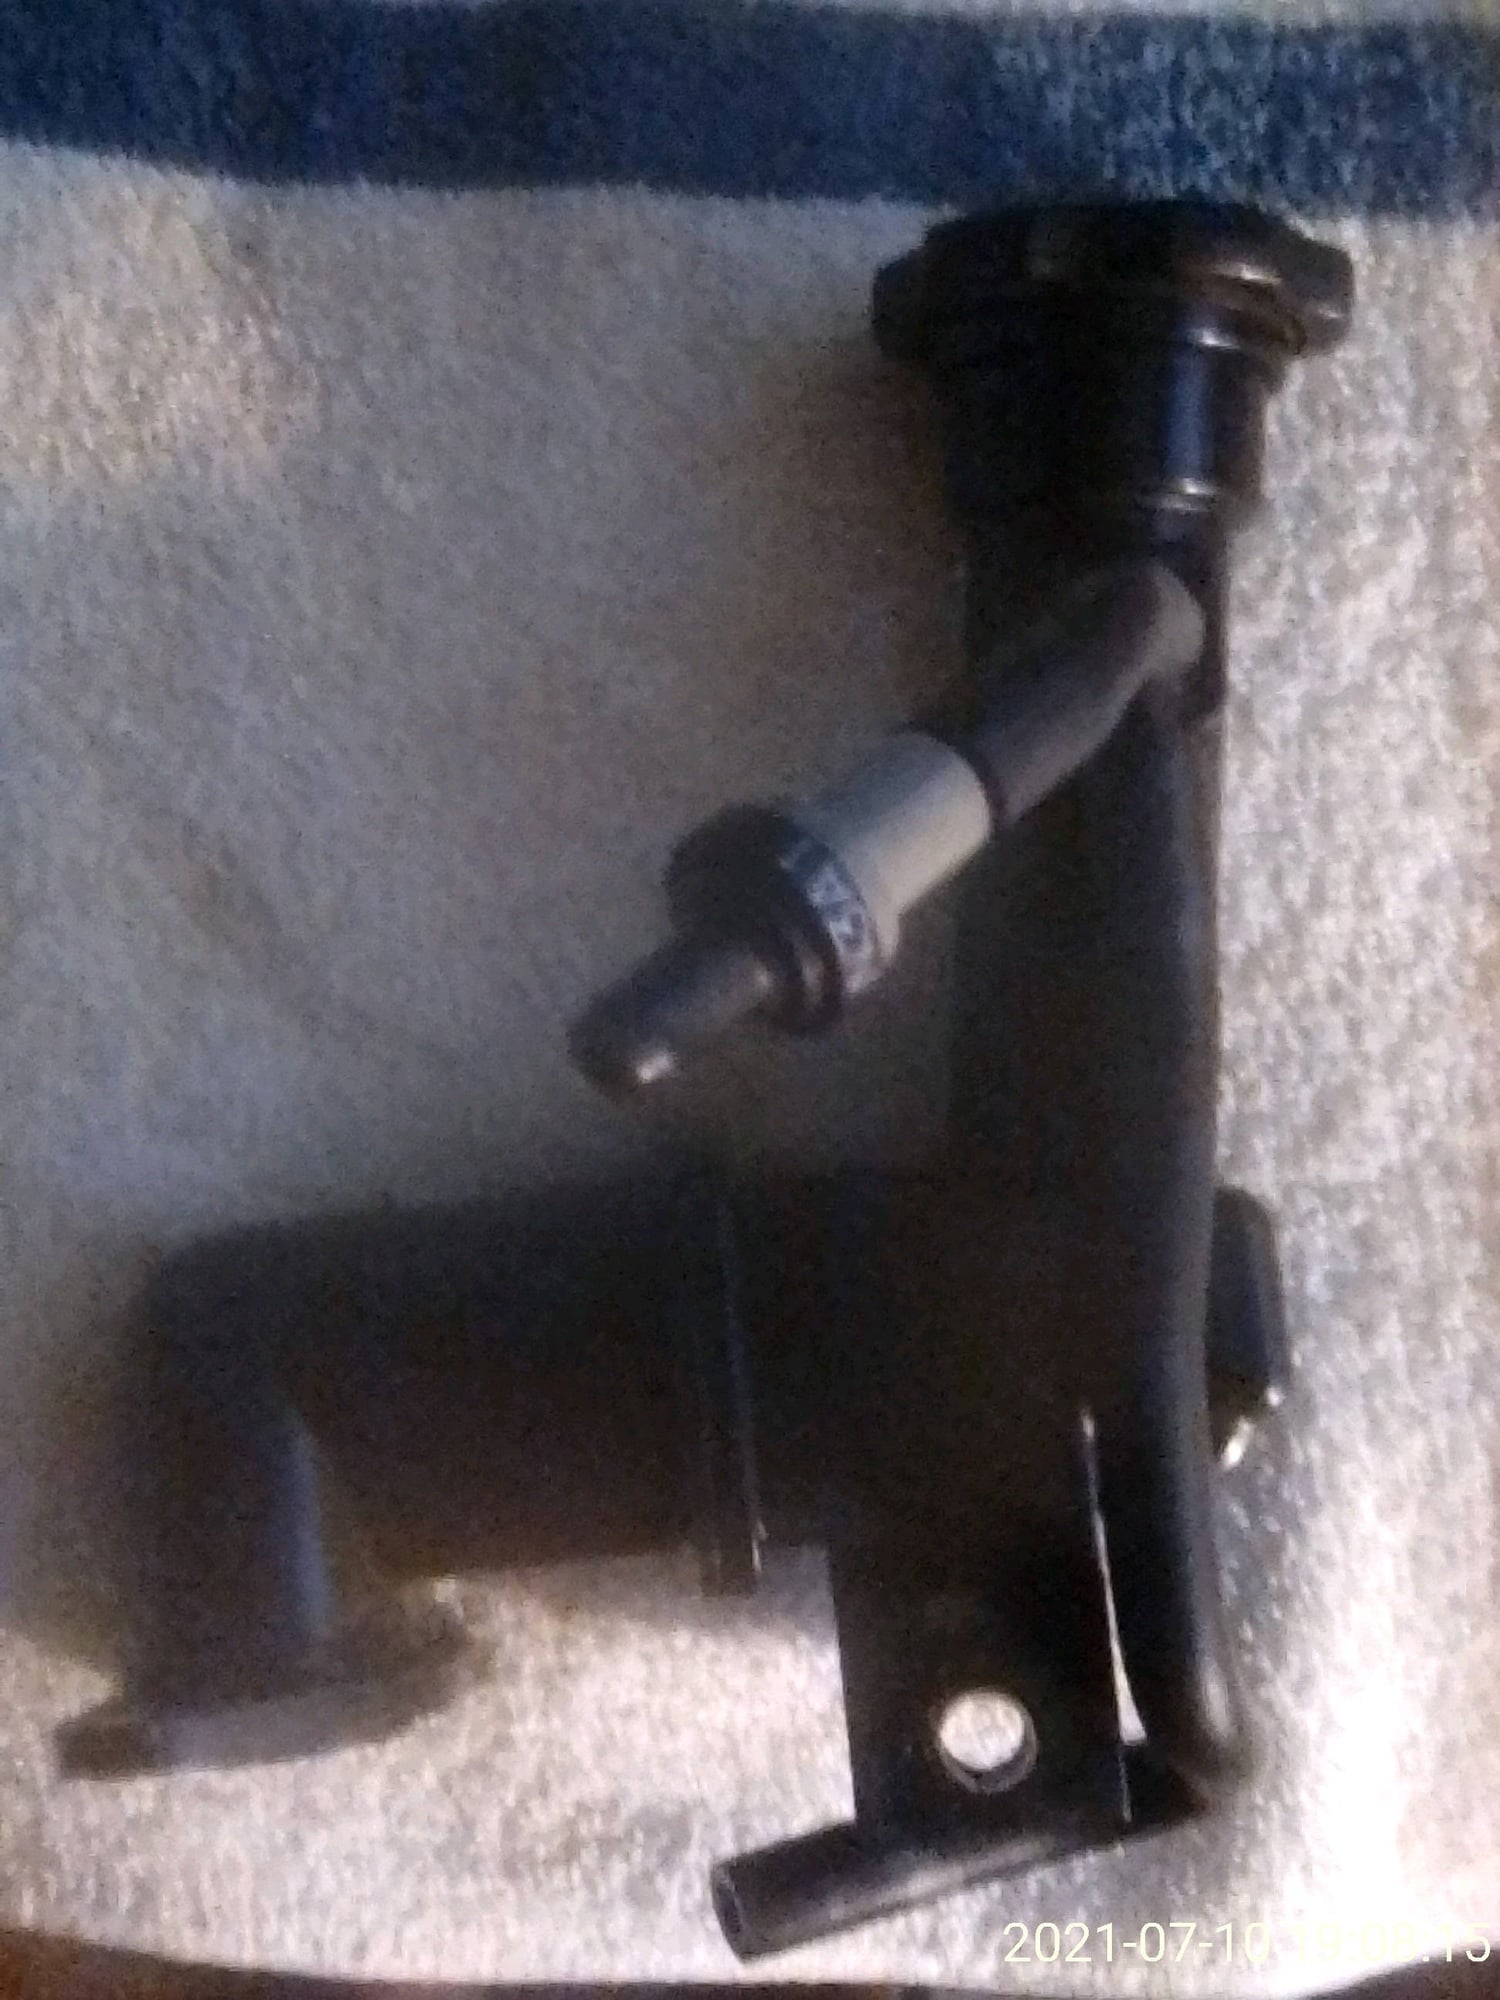 Miscellaneous - FD OEM Oil Filler Neck Assembly - Used - 1993 to 1995 Mazda RX-7 - San Jose, CA 95121, United States